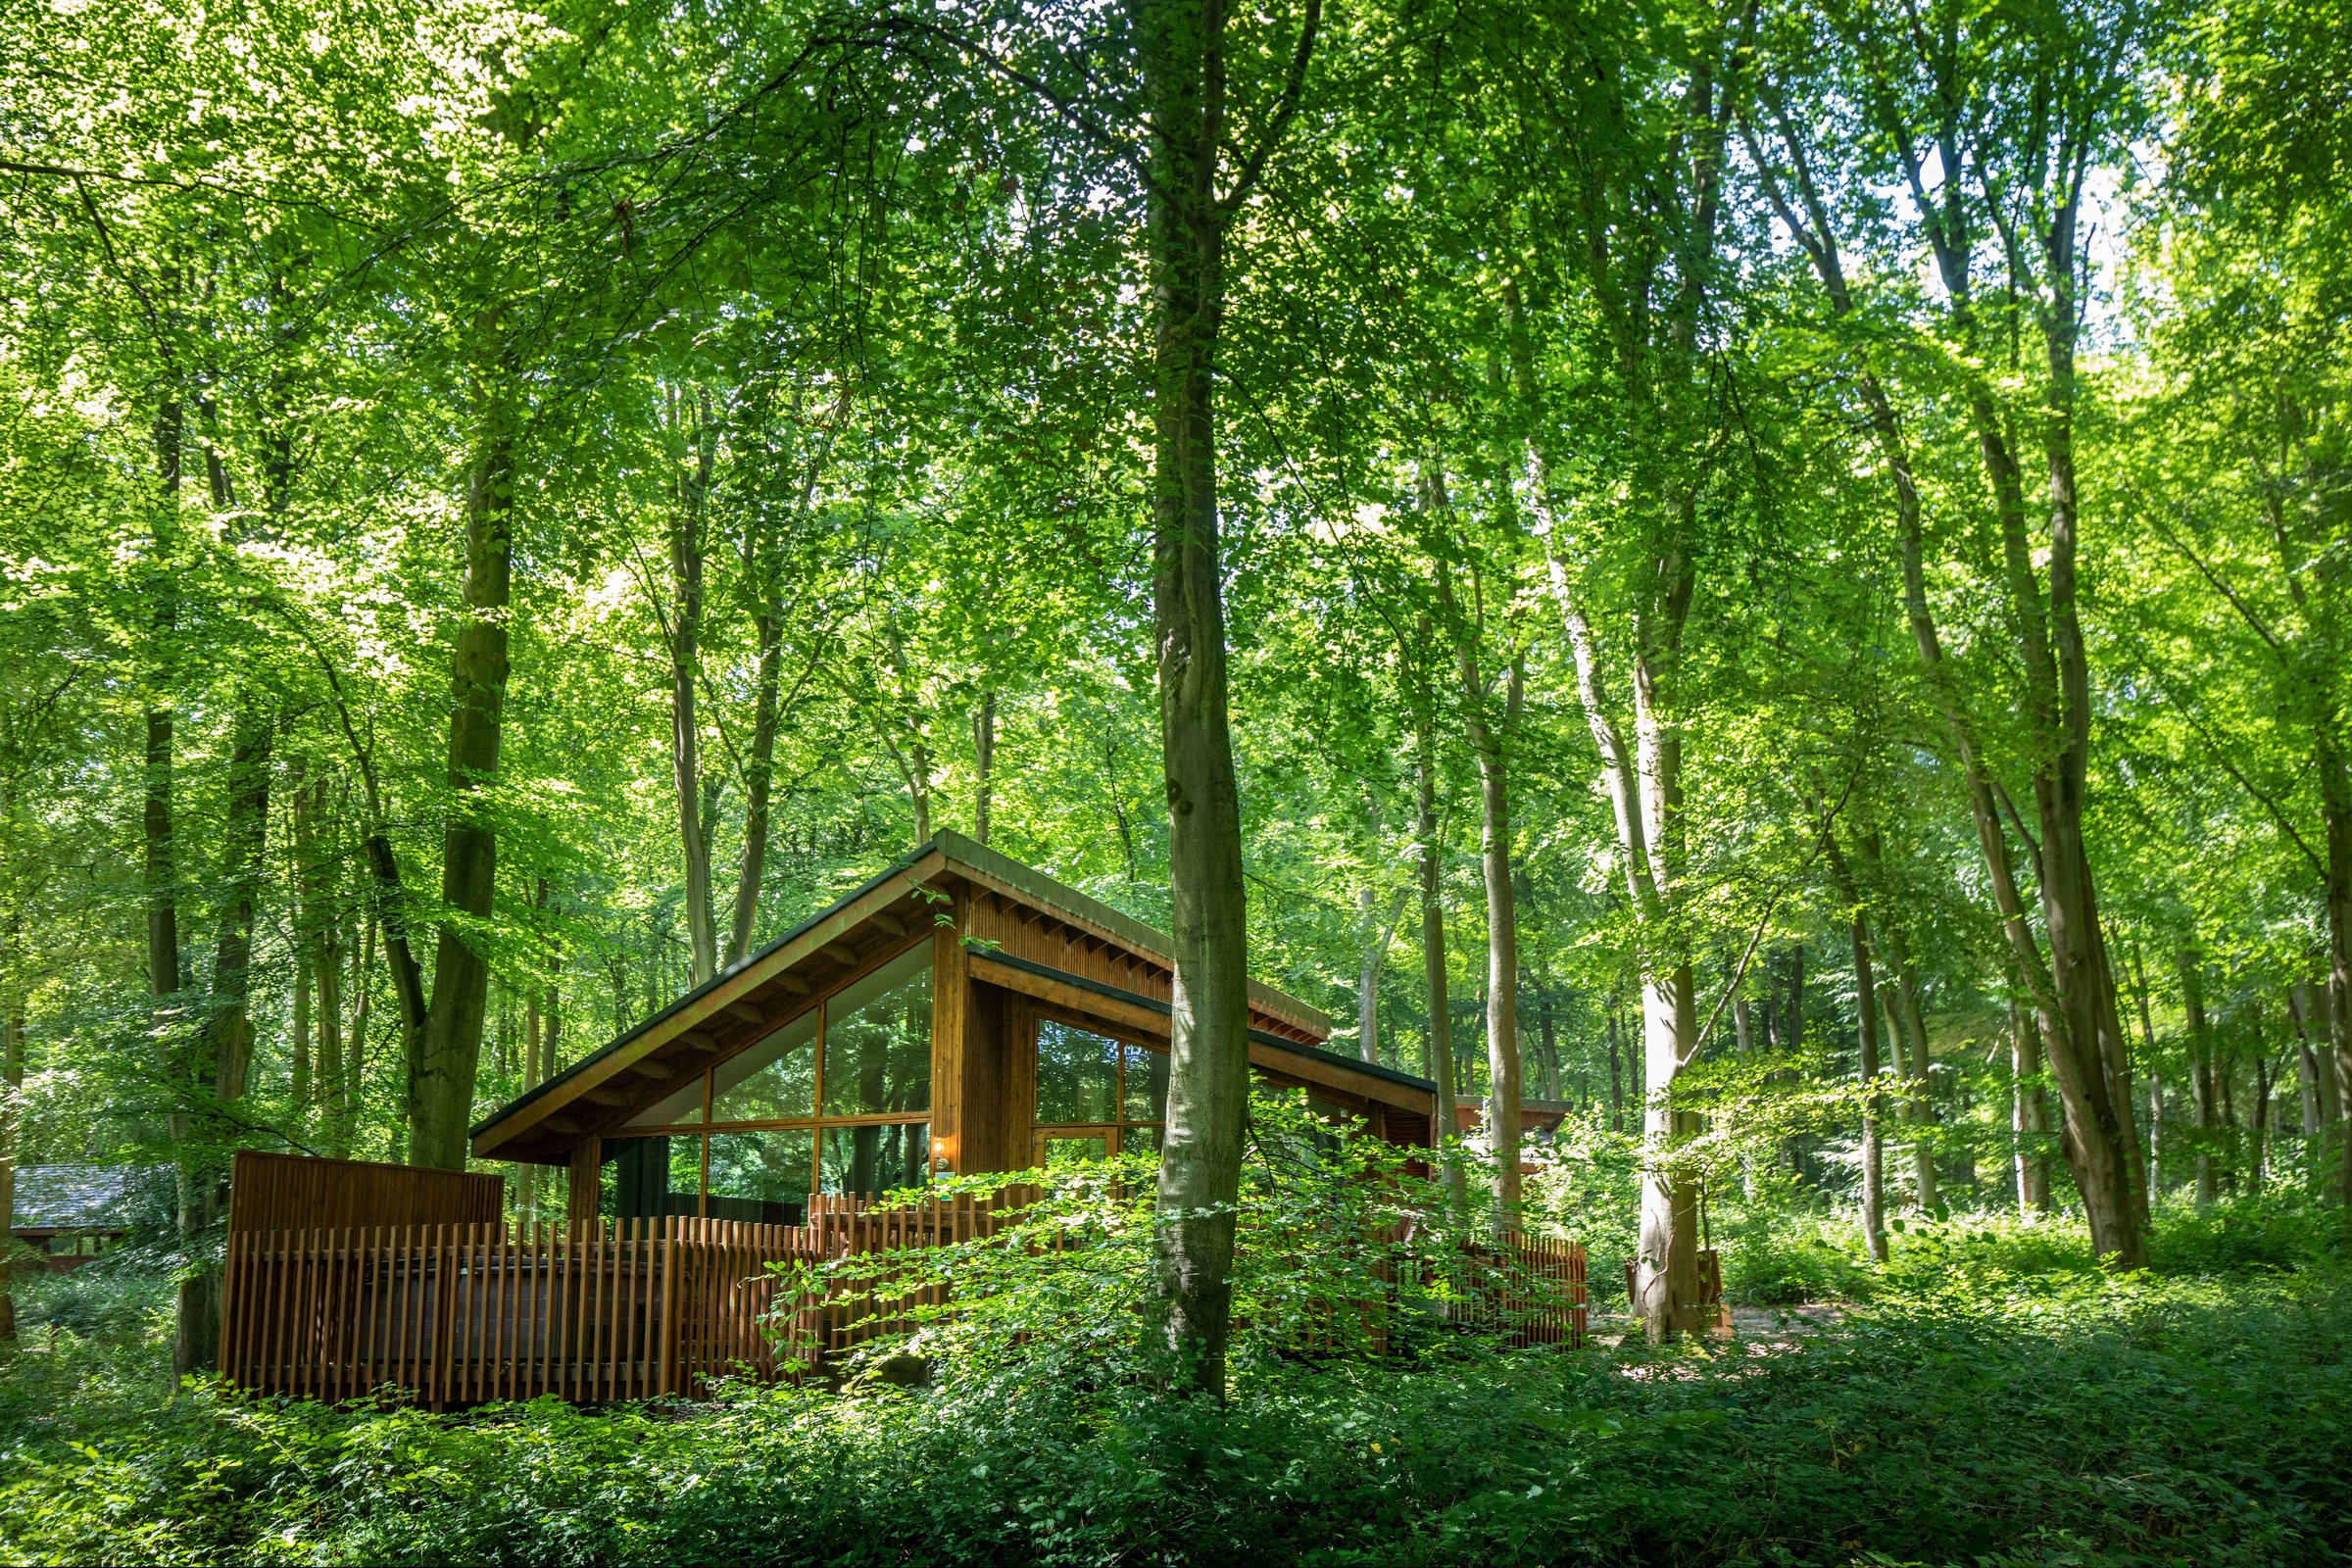 Plan your visit at Blackwood Forest, Hampshire